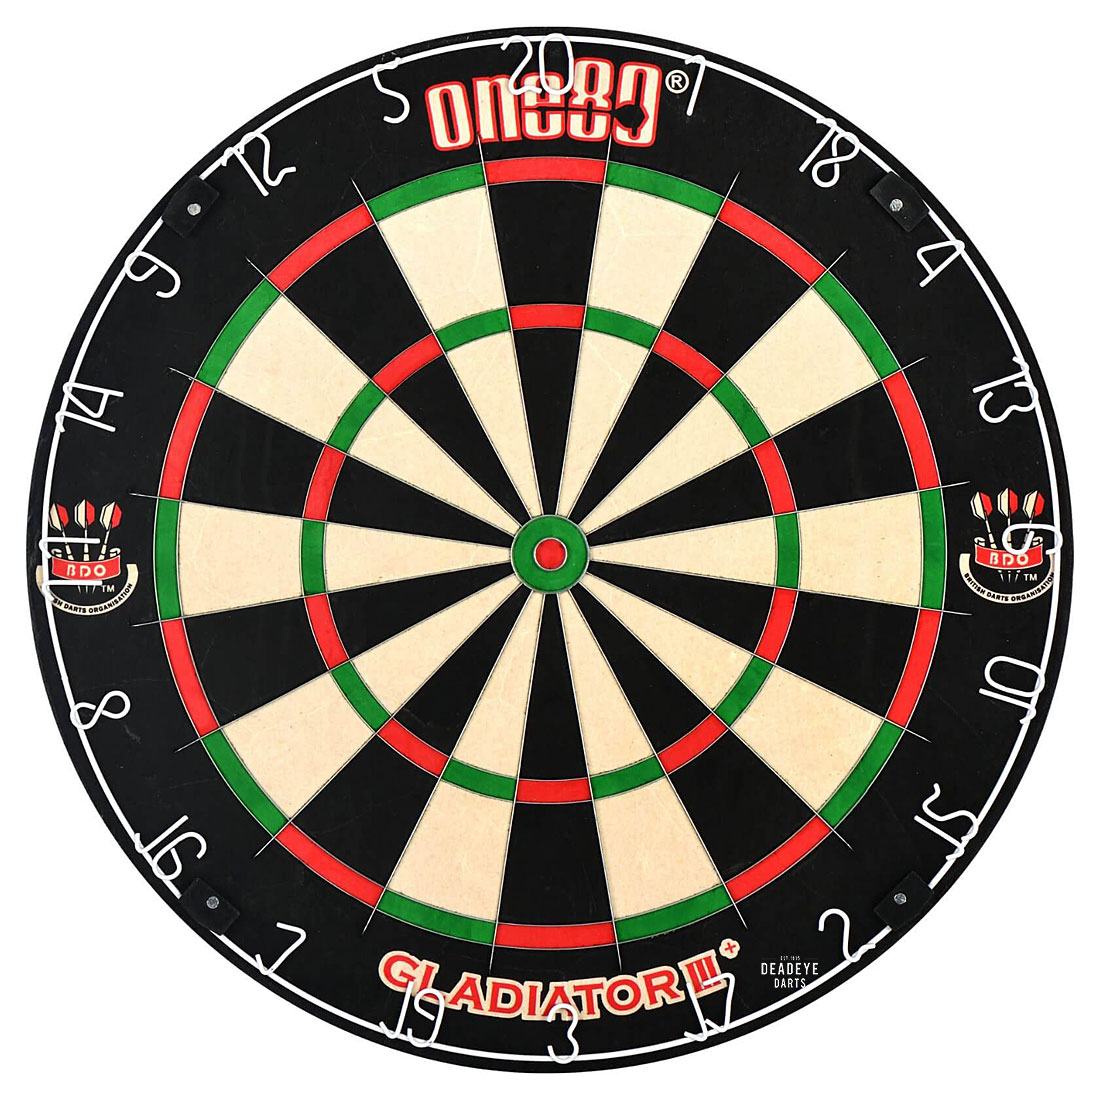 The Best Dartboards of 2021